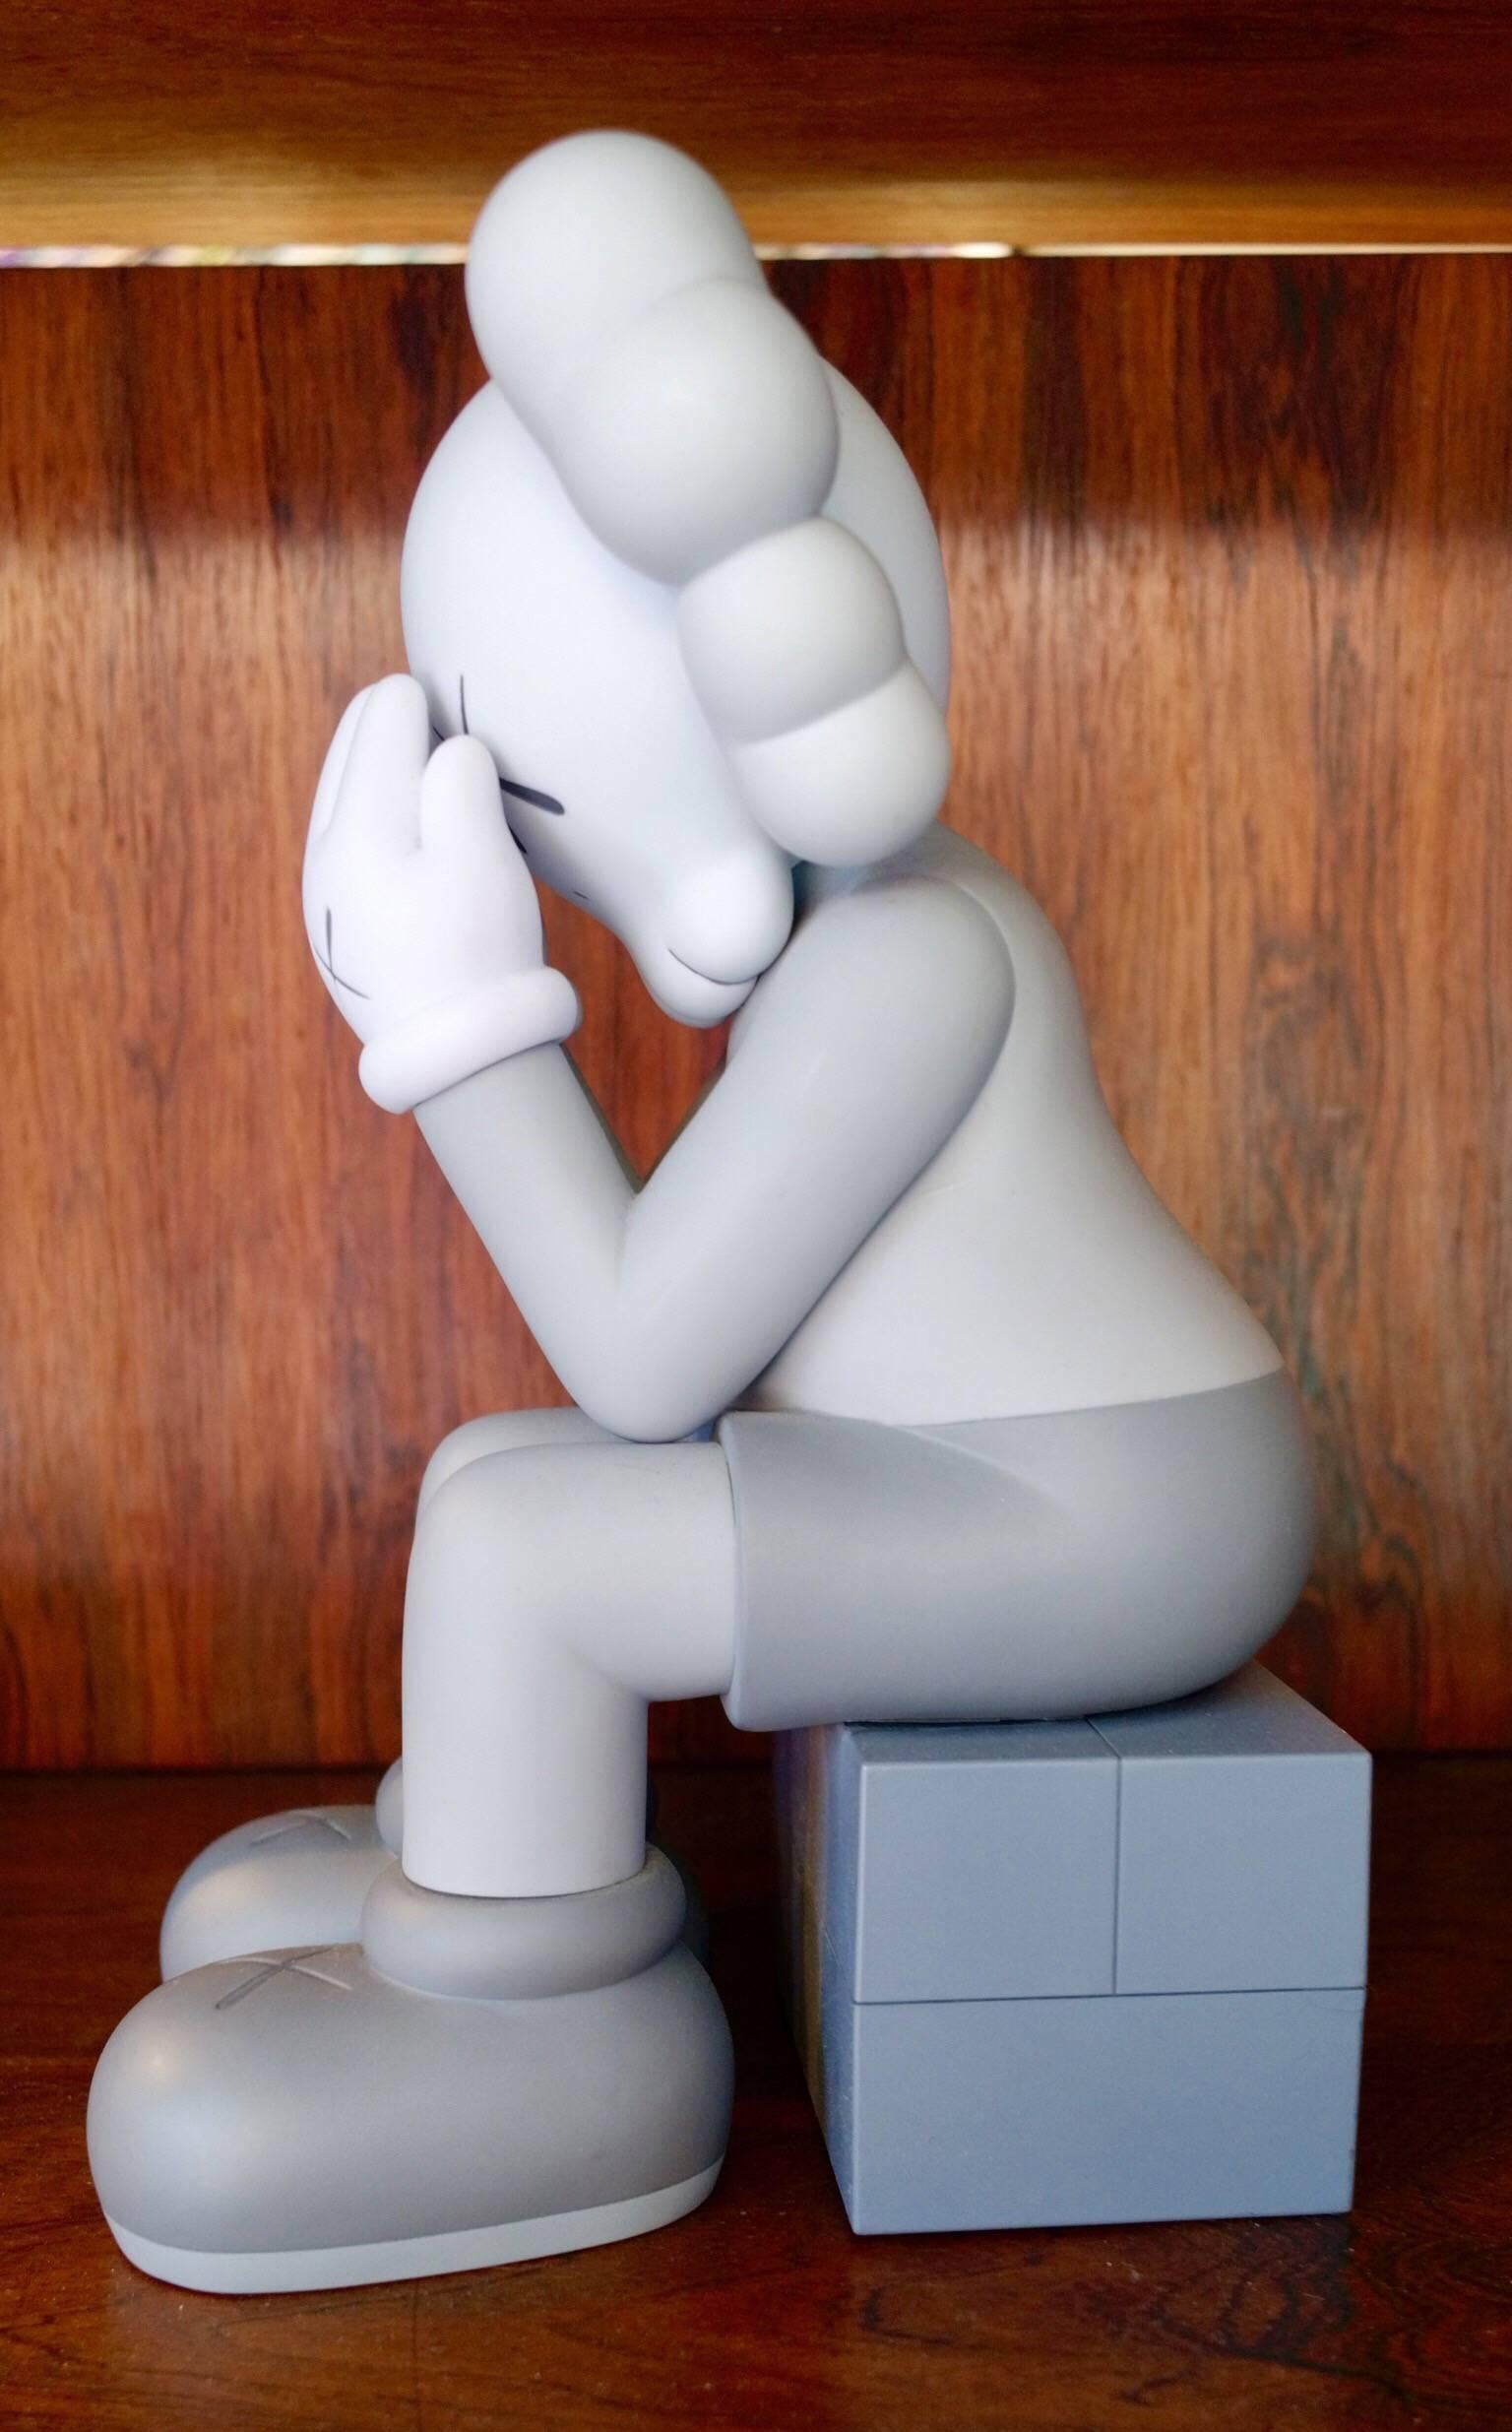 Kaws, passing through companion, 2013.
Grey.
Painted cast vinyl.
In its original packaging / box.
Produced and manufactured Medicom Toy, China.